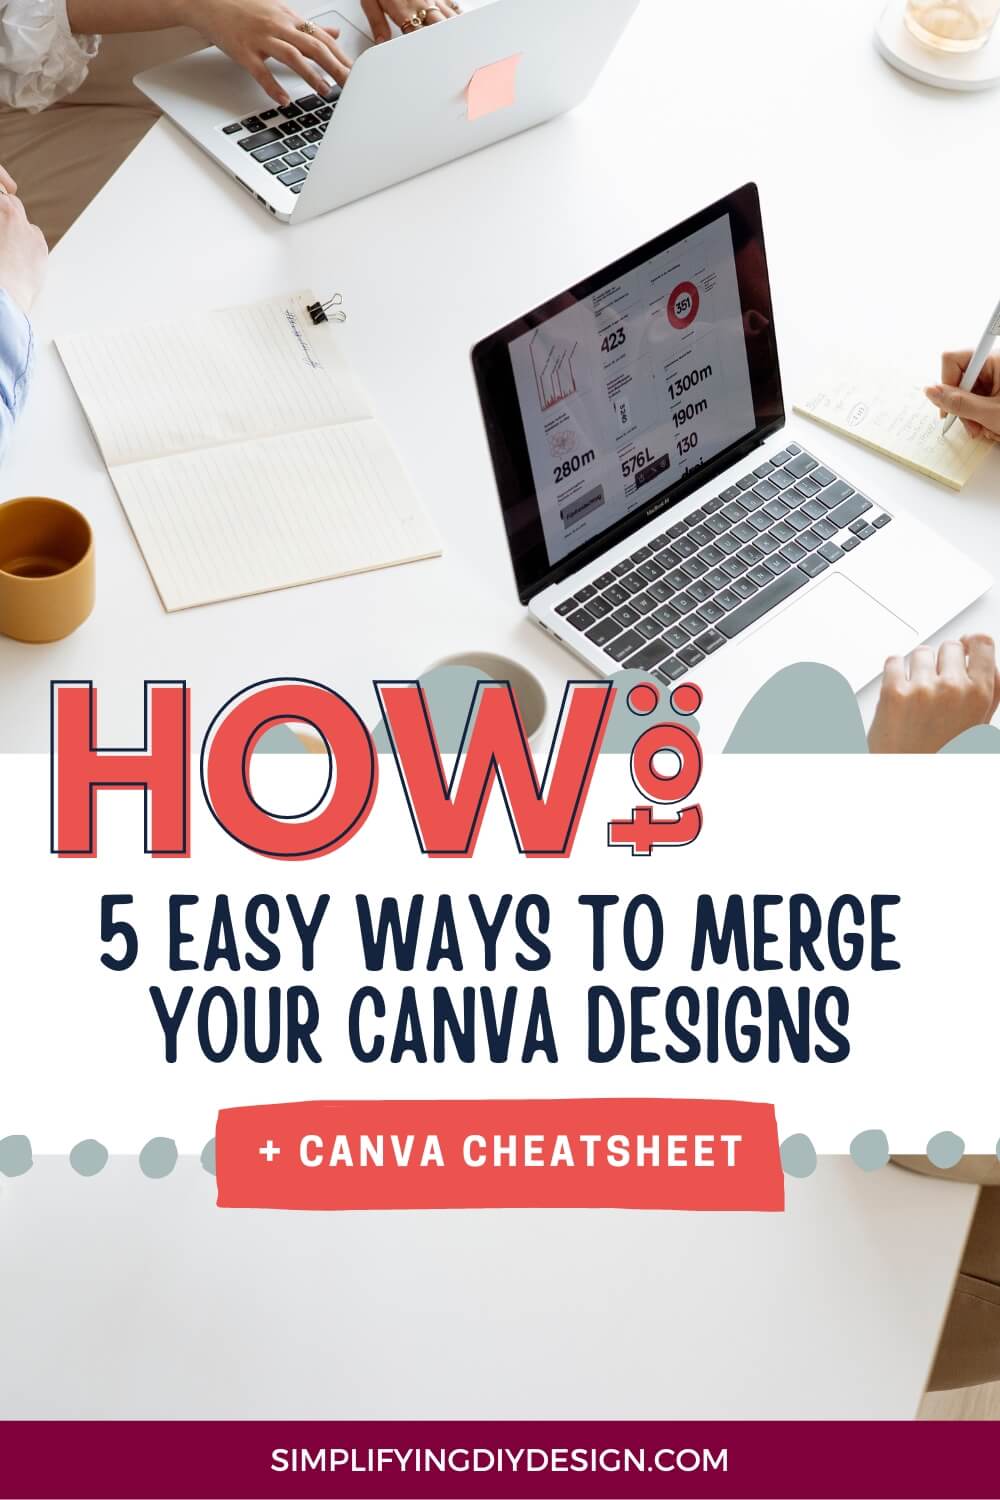 Easily copy pages from one Canva design to another! Knowing how to merge Canva designs is a great way to repurpose content and save on design time, too!